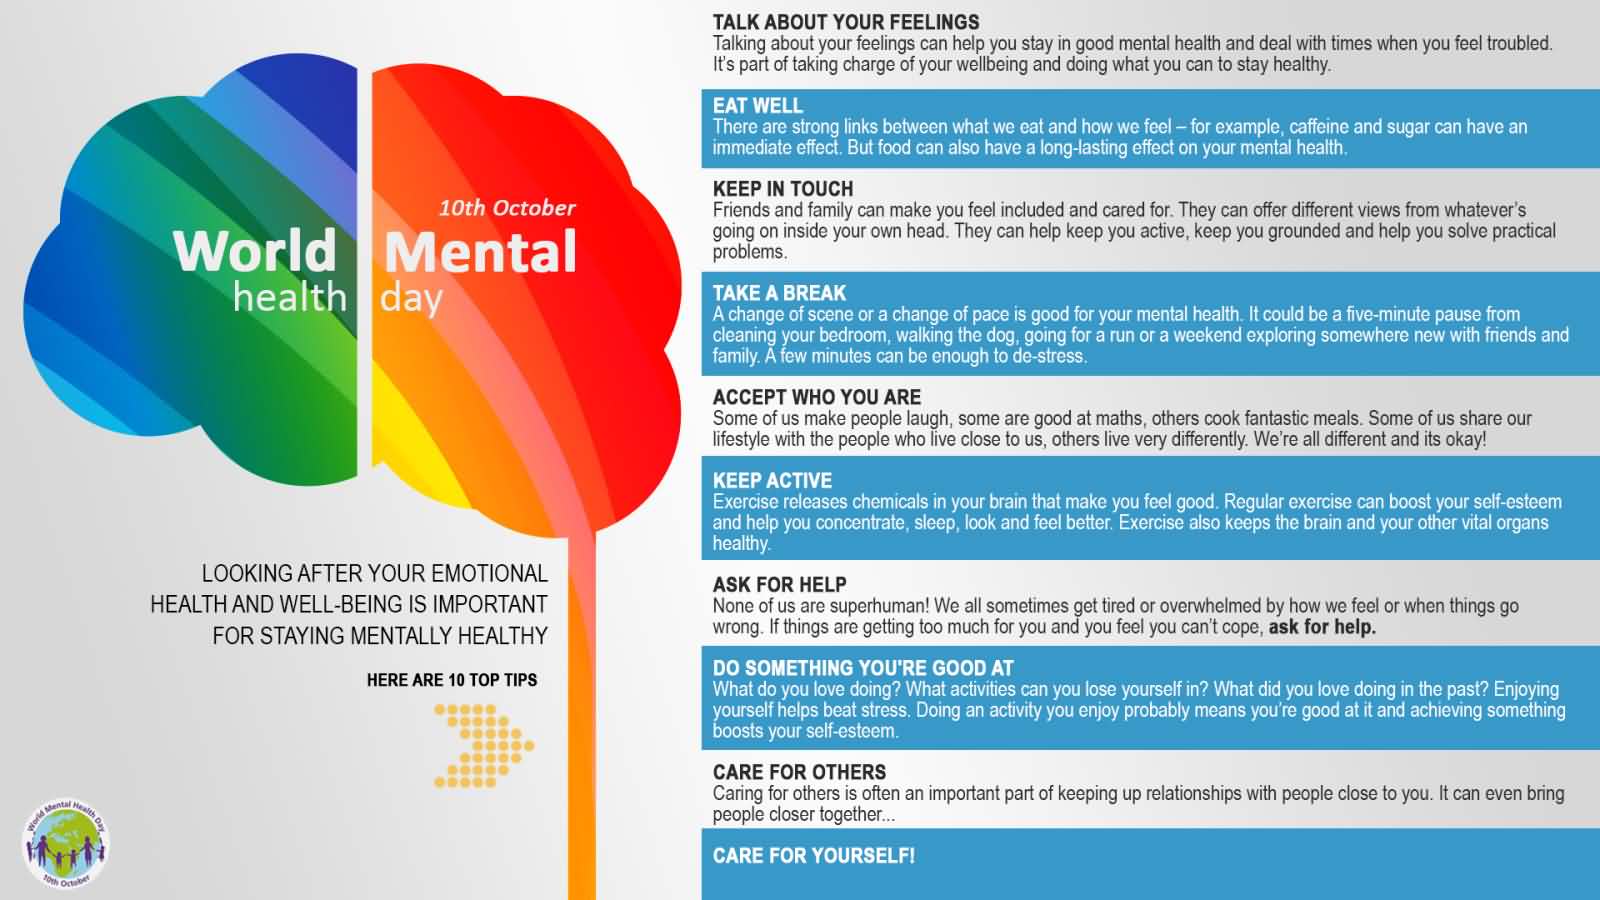 10th october World Mental Health Day